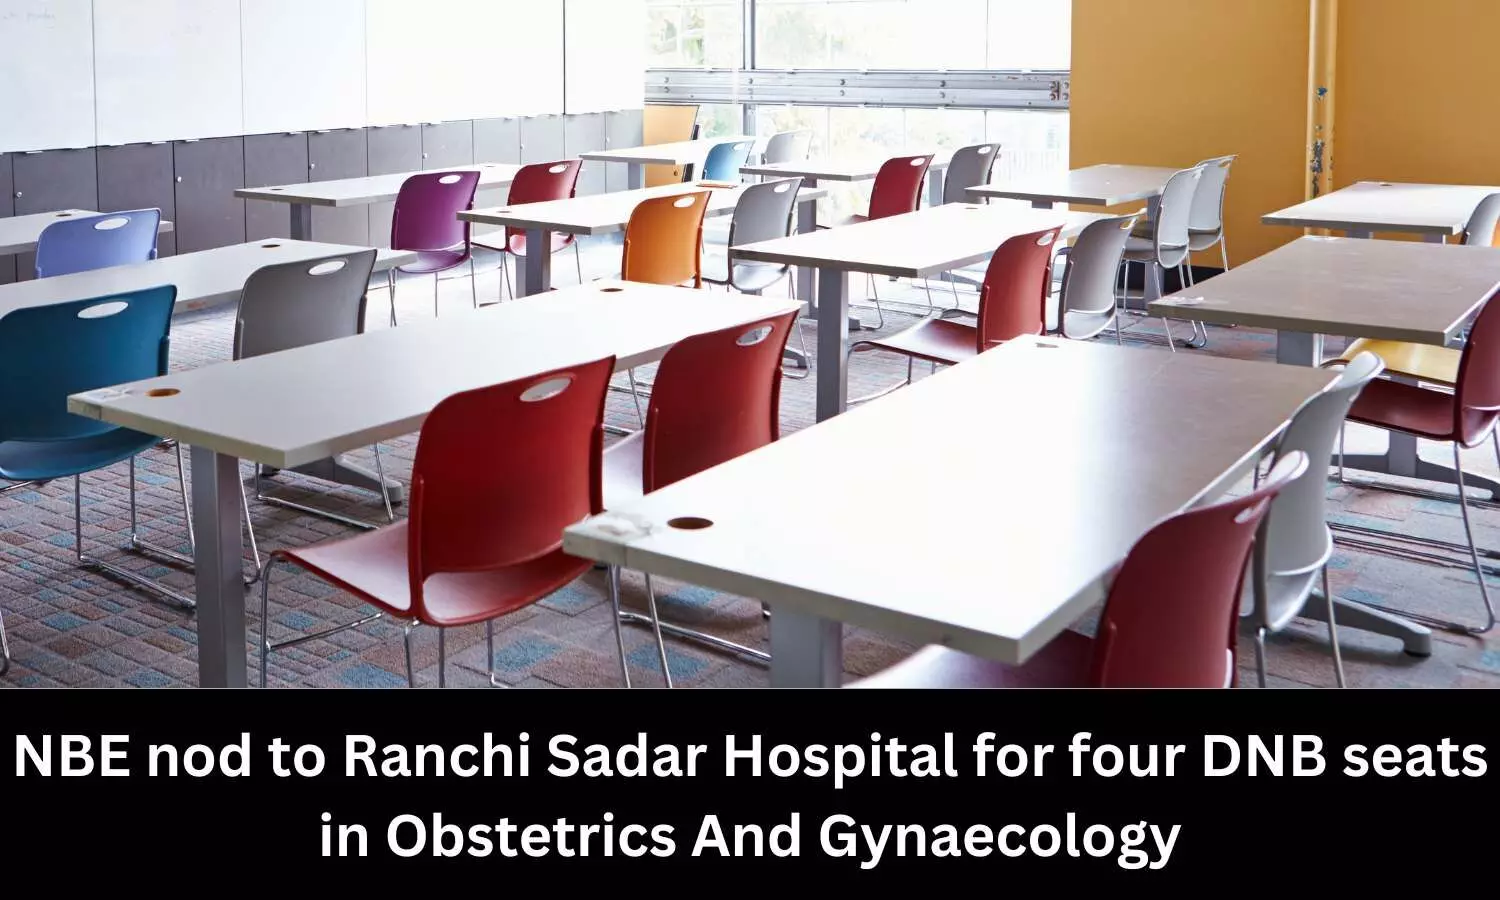 Ranchi Sadar Hospital gets NBE nod for 4 DNB seats in Obstetrics and Gynaecology